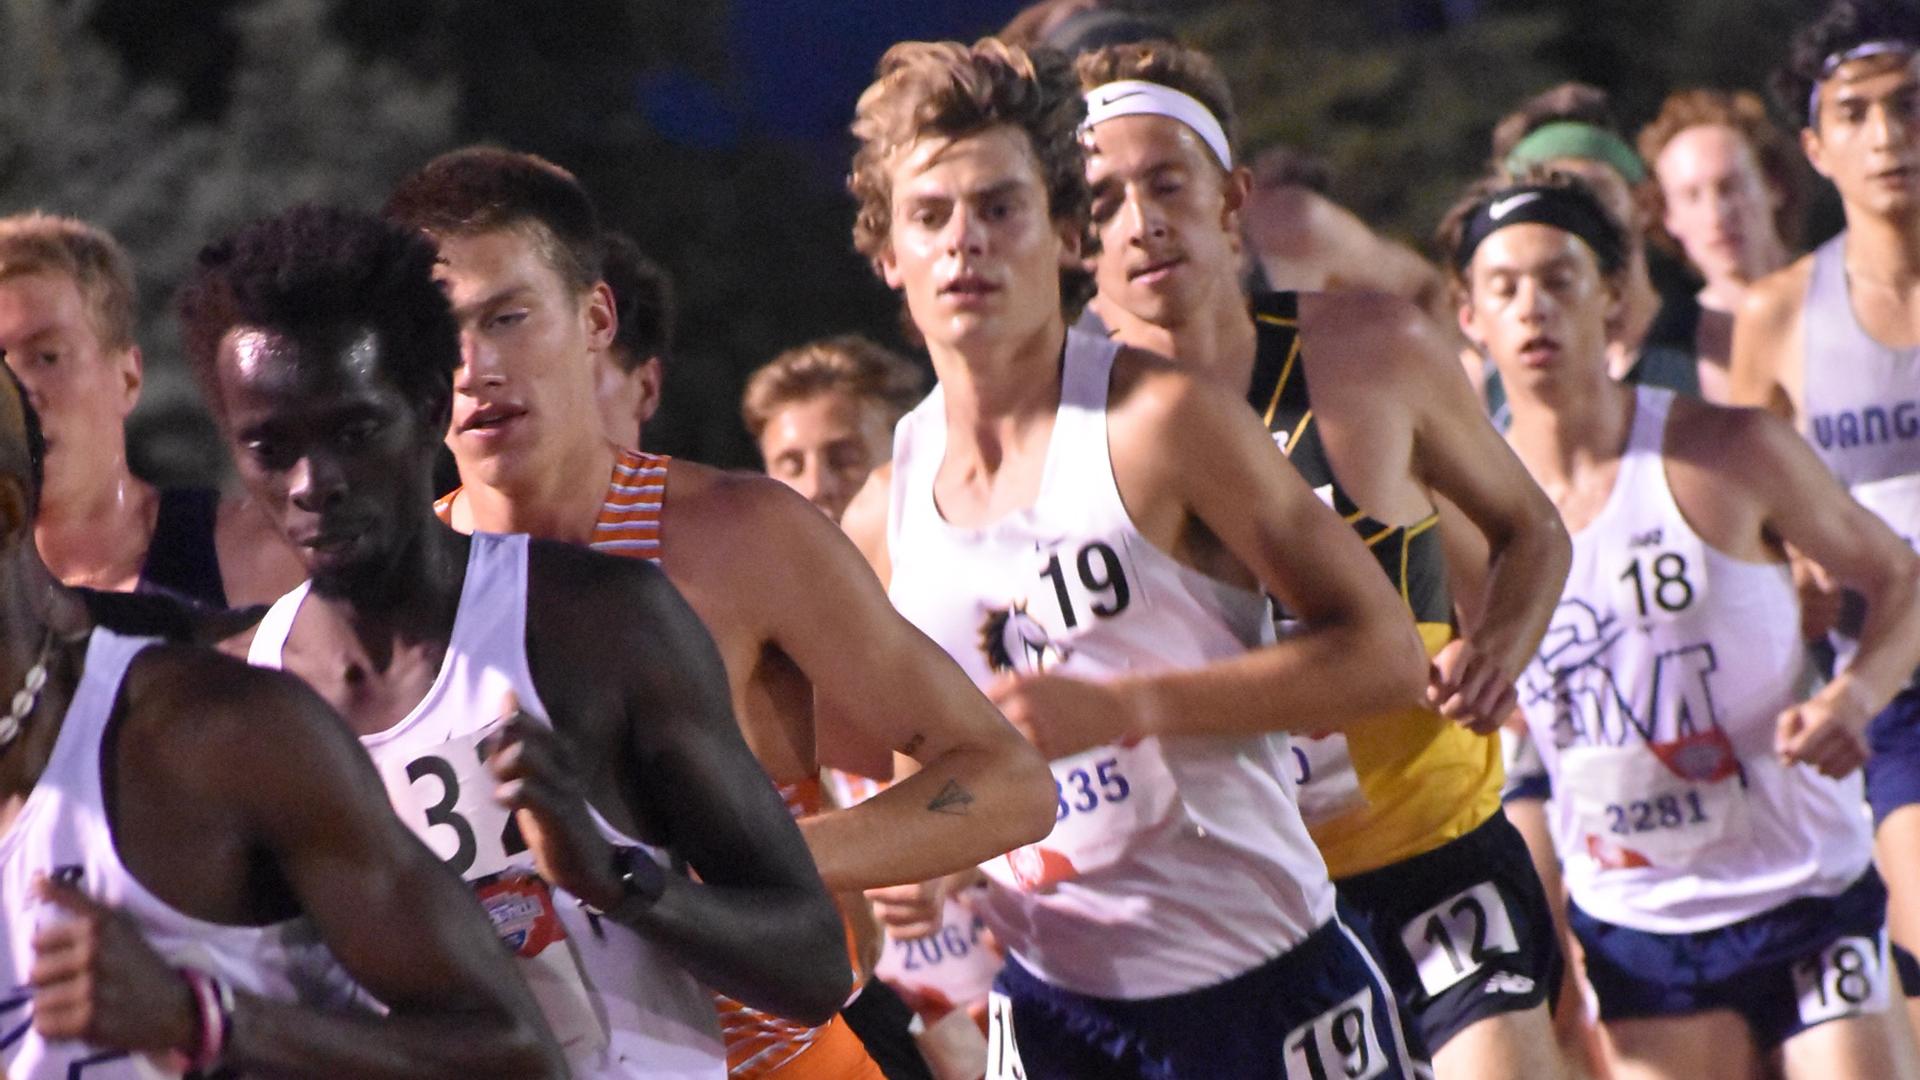 TMU Runner Wins NAIA National Title in 10K Featured Image